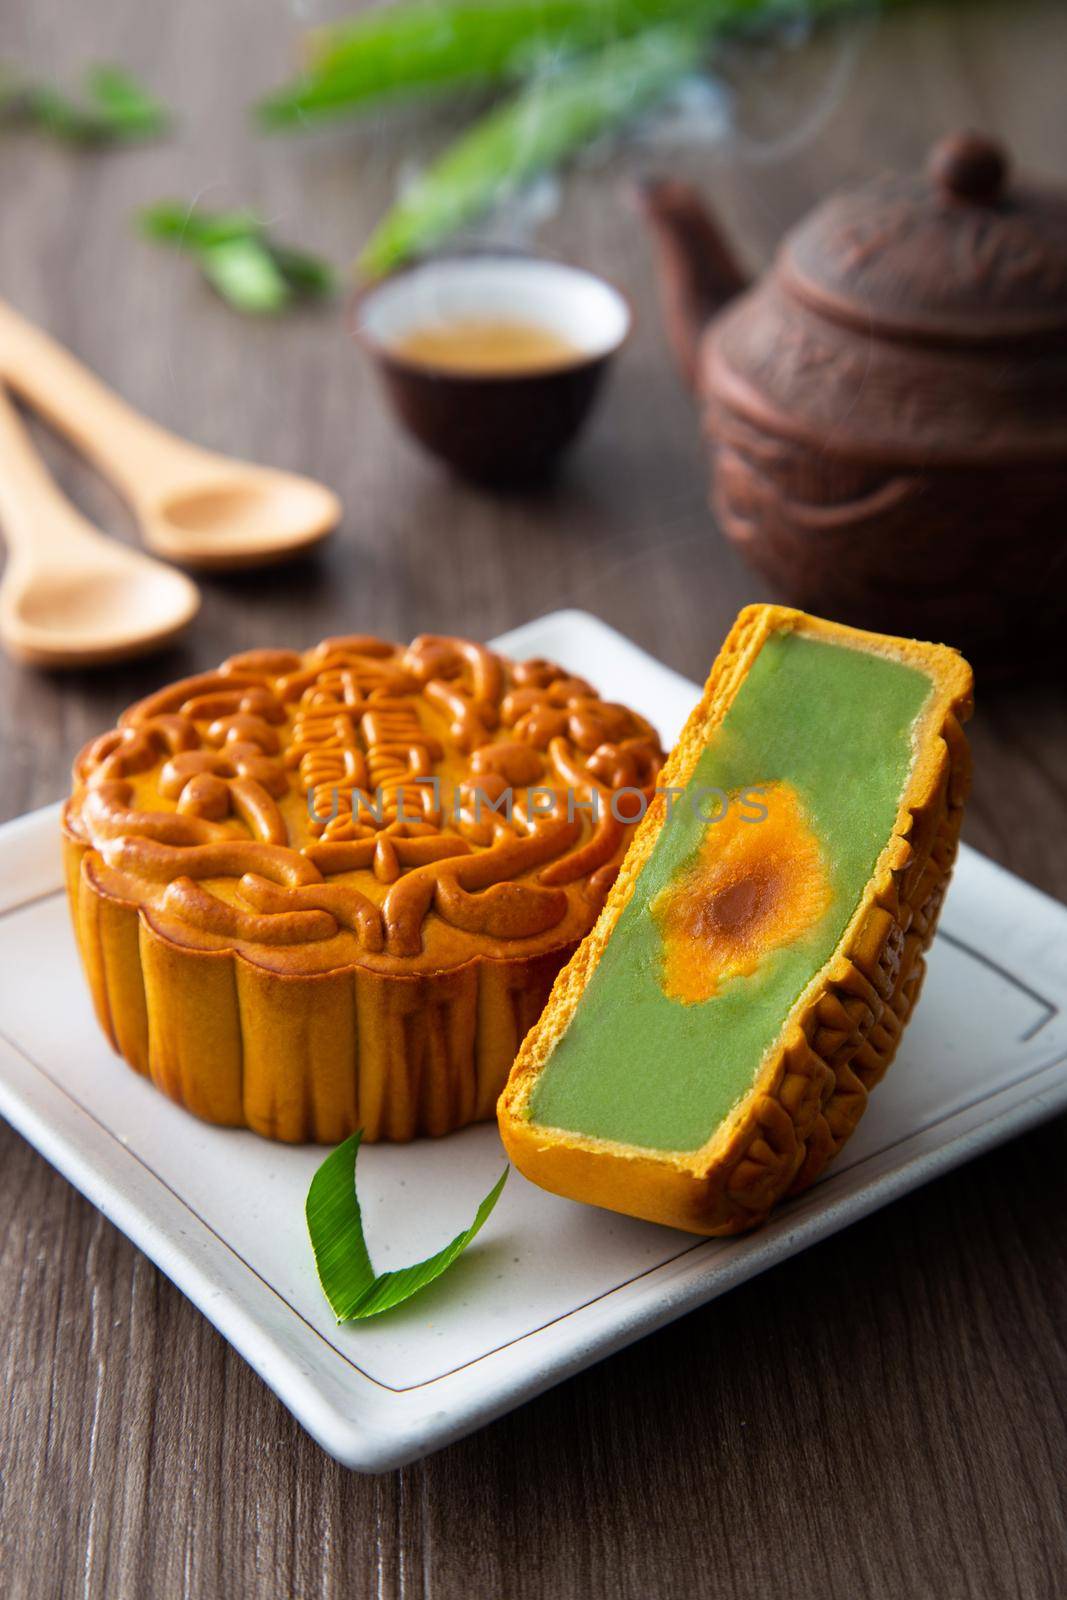 Moon cakes with Chinese tea. The Chinese character on the mooncake represent "Pandan lotus paste with single york" in English